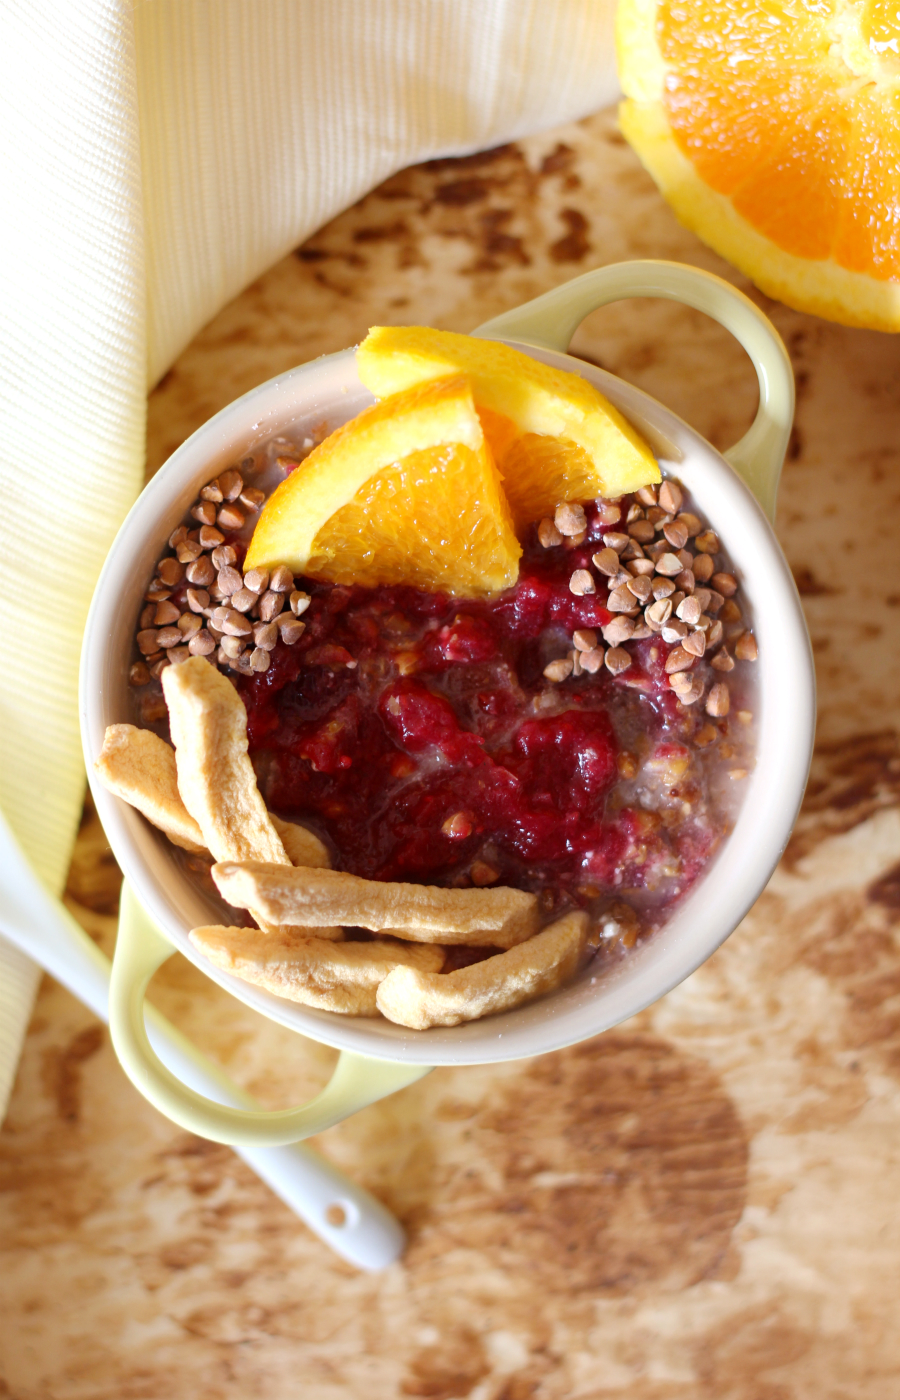 Raw Winter Kasha Porridge | Strength and Sunshine @RebeccaGF666 A cozy Raw Winter Kasha Porridge for when you're looking for some wholesome nourishment to start your day! With seasonal flavors and homemade cranberry sauce, this gluten-free, vegan, and allergy-free breakfast is sure to be a new favorite!